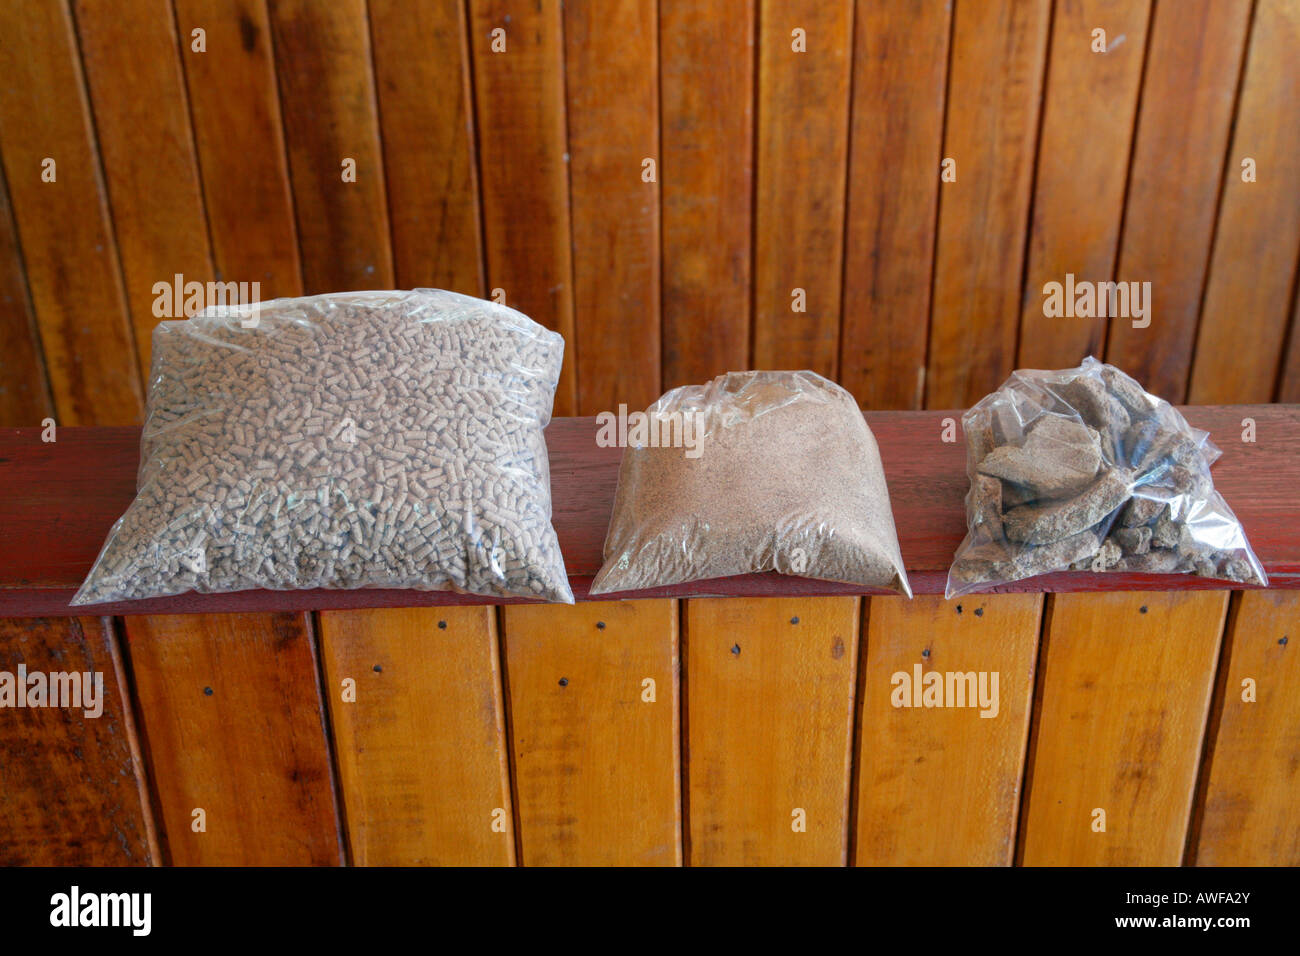 Coconut products, shavings, chips and grease, coconut processing, Georgetown, Guyana, South America Stock Photo